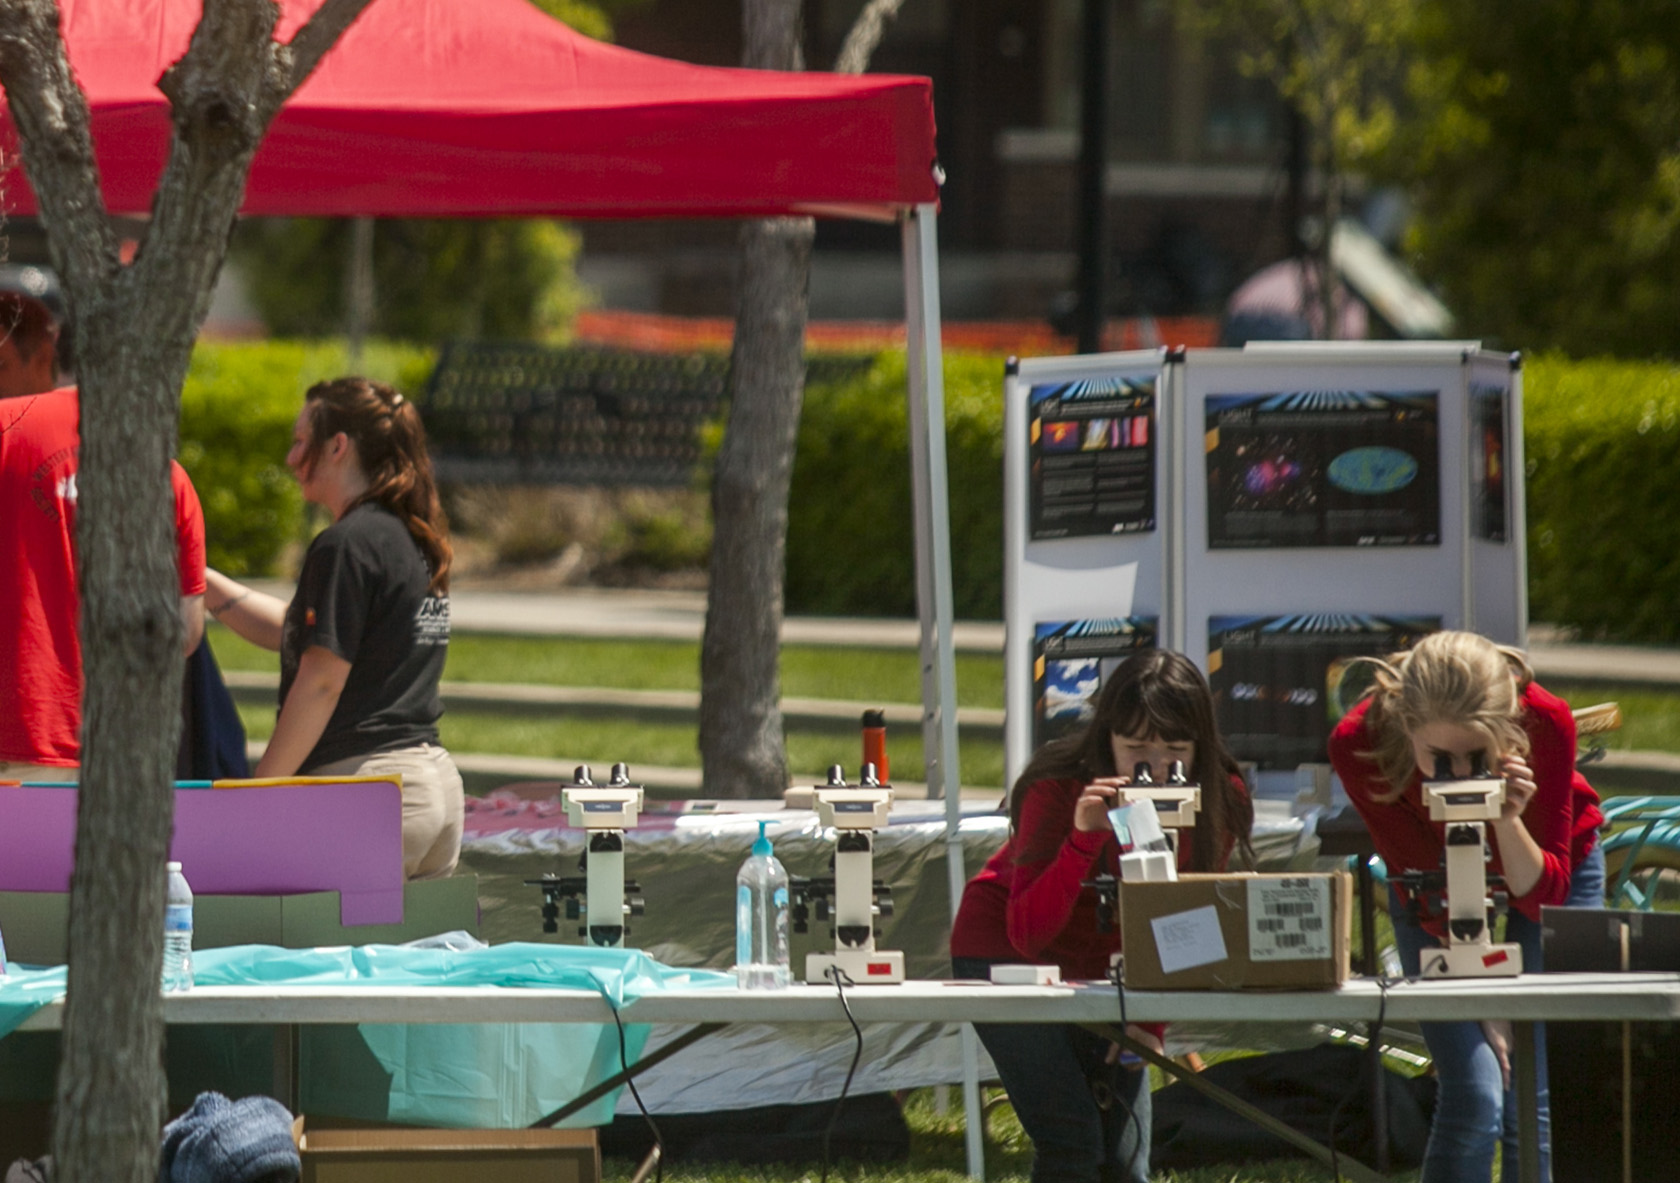 WKU's Microbiology Club shared microscopes at the 2015 SKy Science Festival